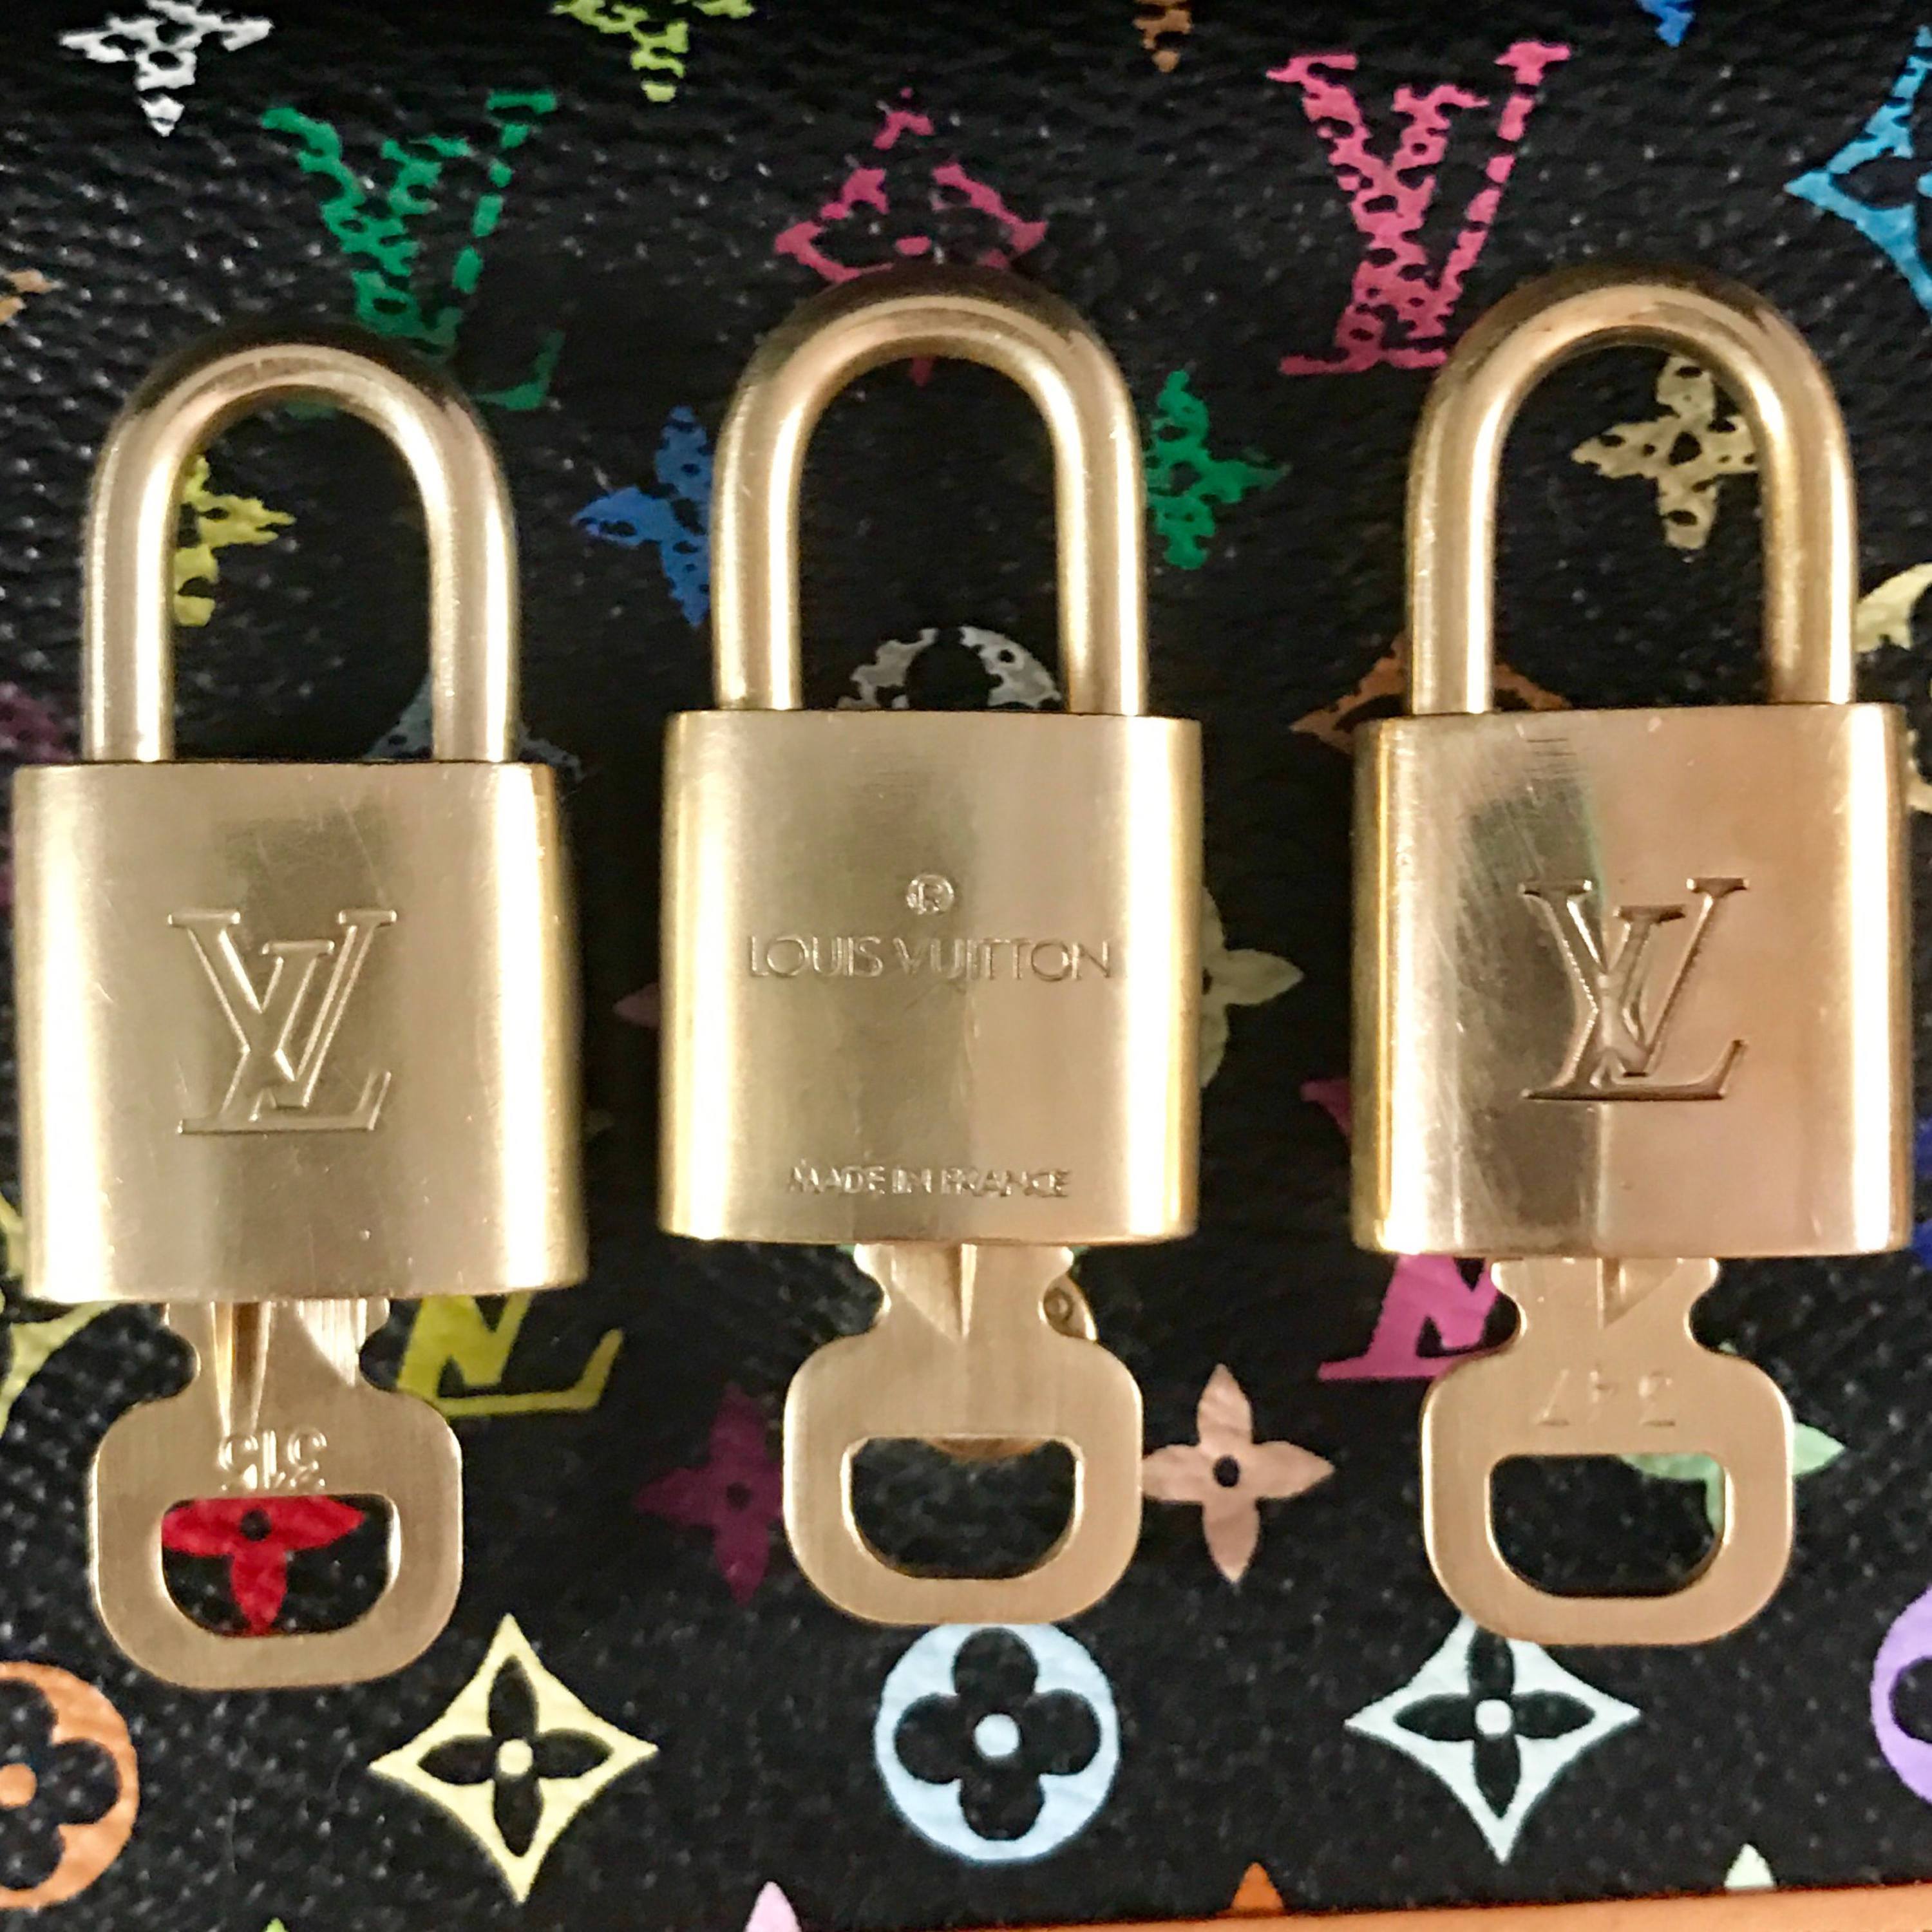 Authentic Louis Vuitton lock and key set #448 Gold